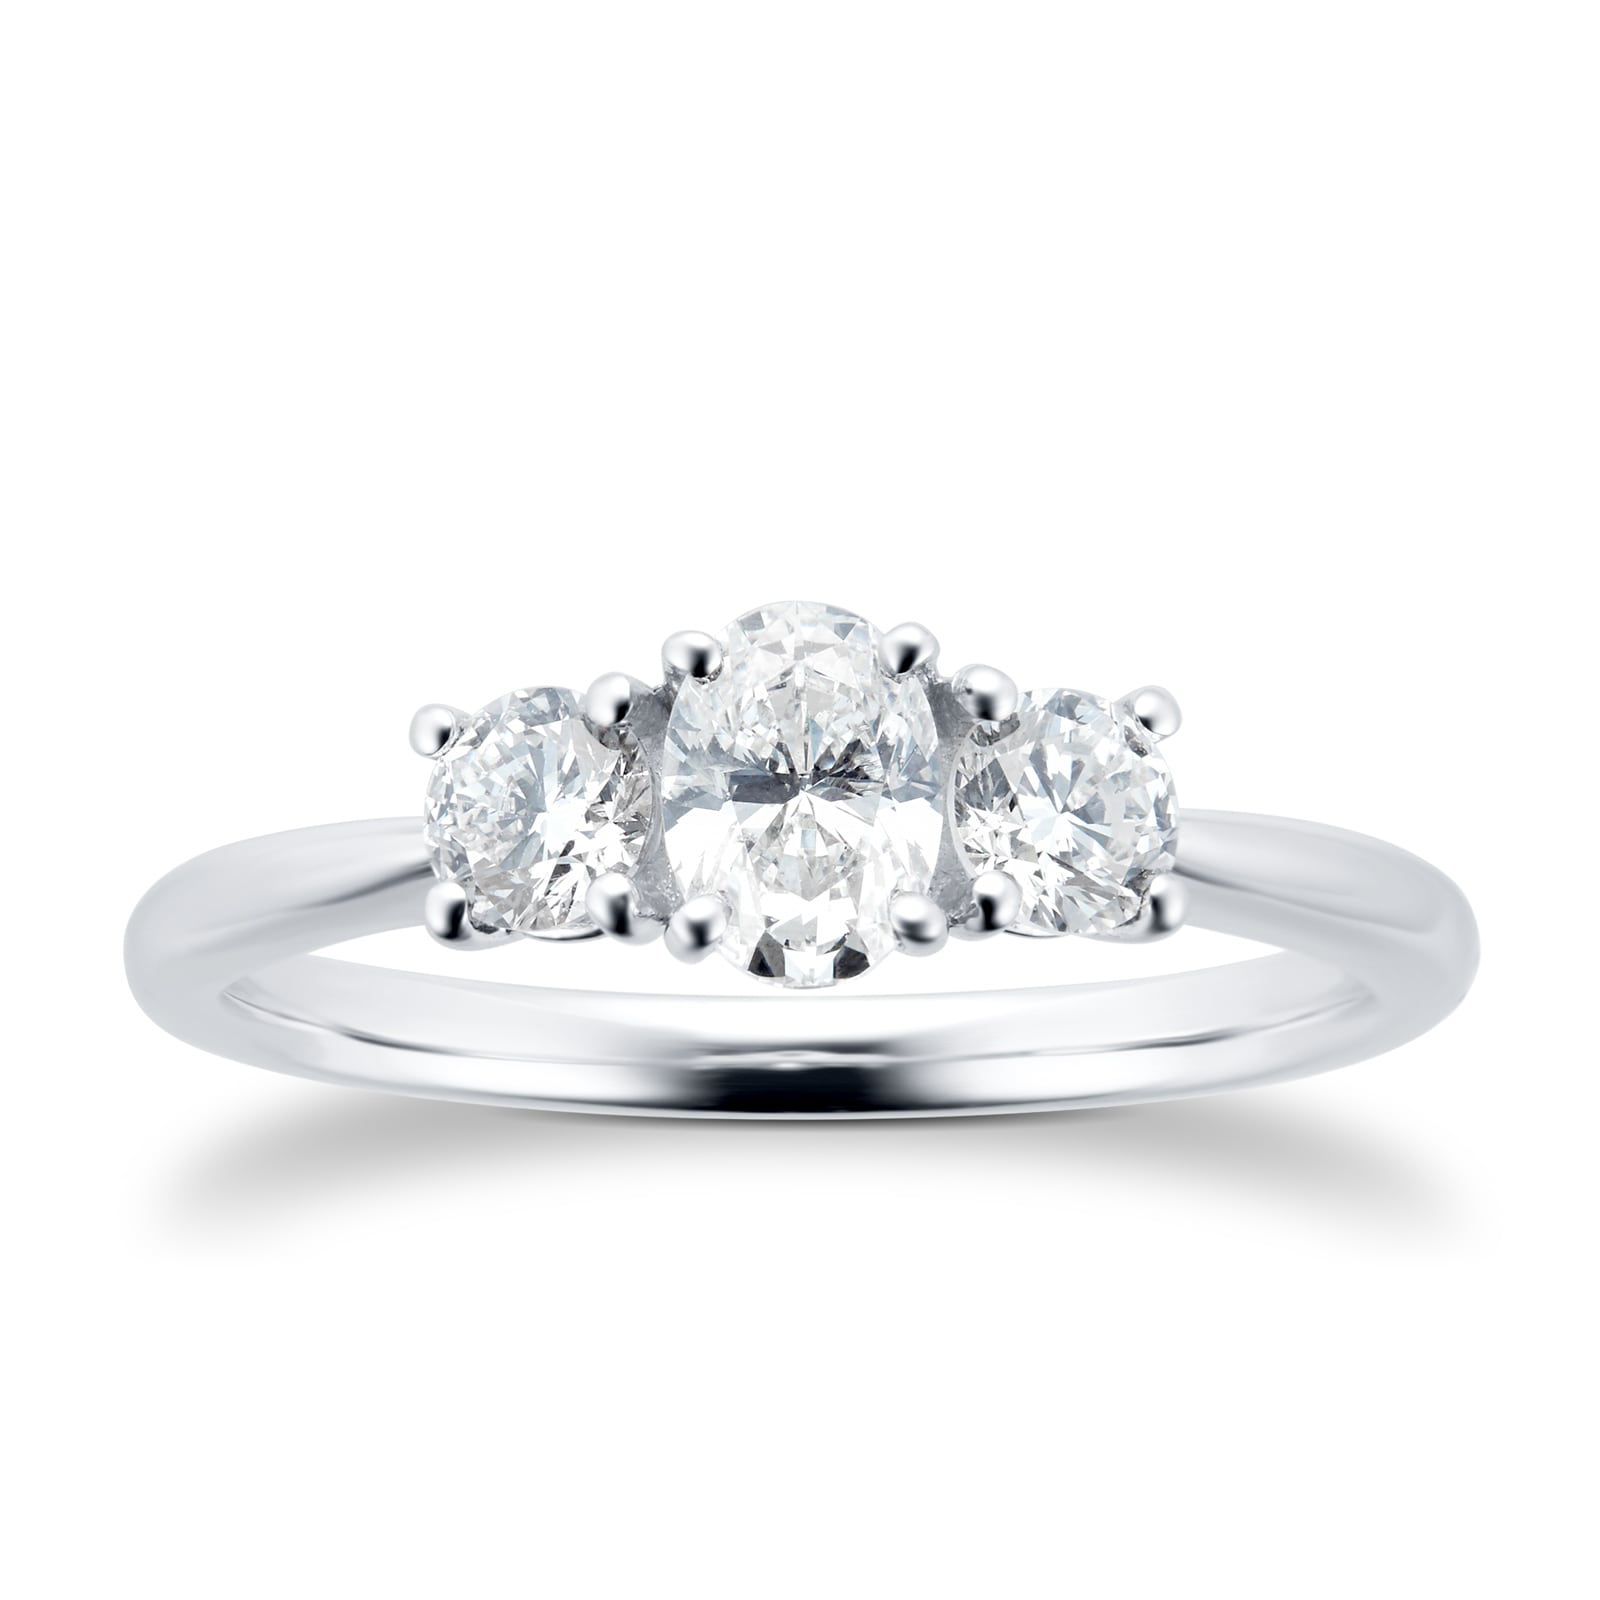 Platinum 0.76cttw Diamond Thee Stone Oval & Brilliant Cut Engagement Ring - Ring Size J